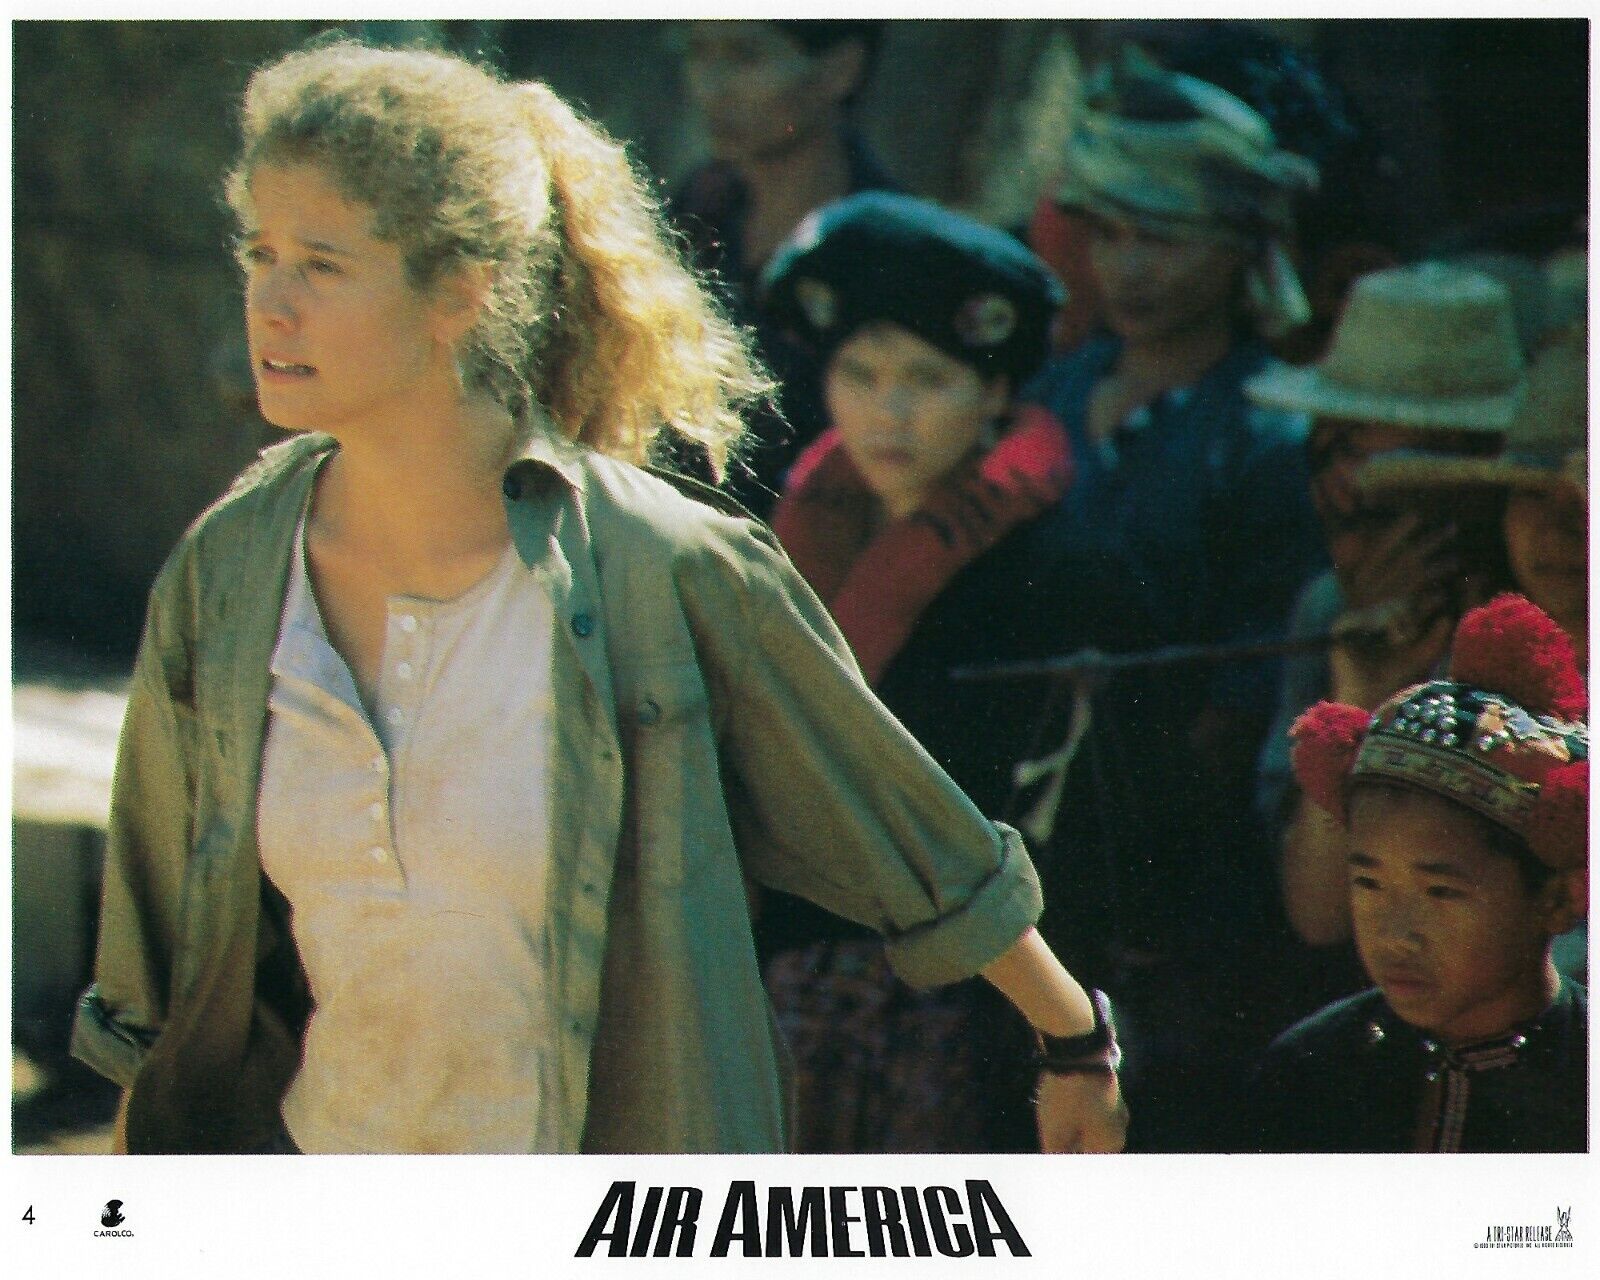 Air America Original 8x10 Lobby Card Poster Photo Poster painting 1990 Downey Jr. Gibson #4